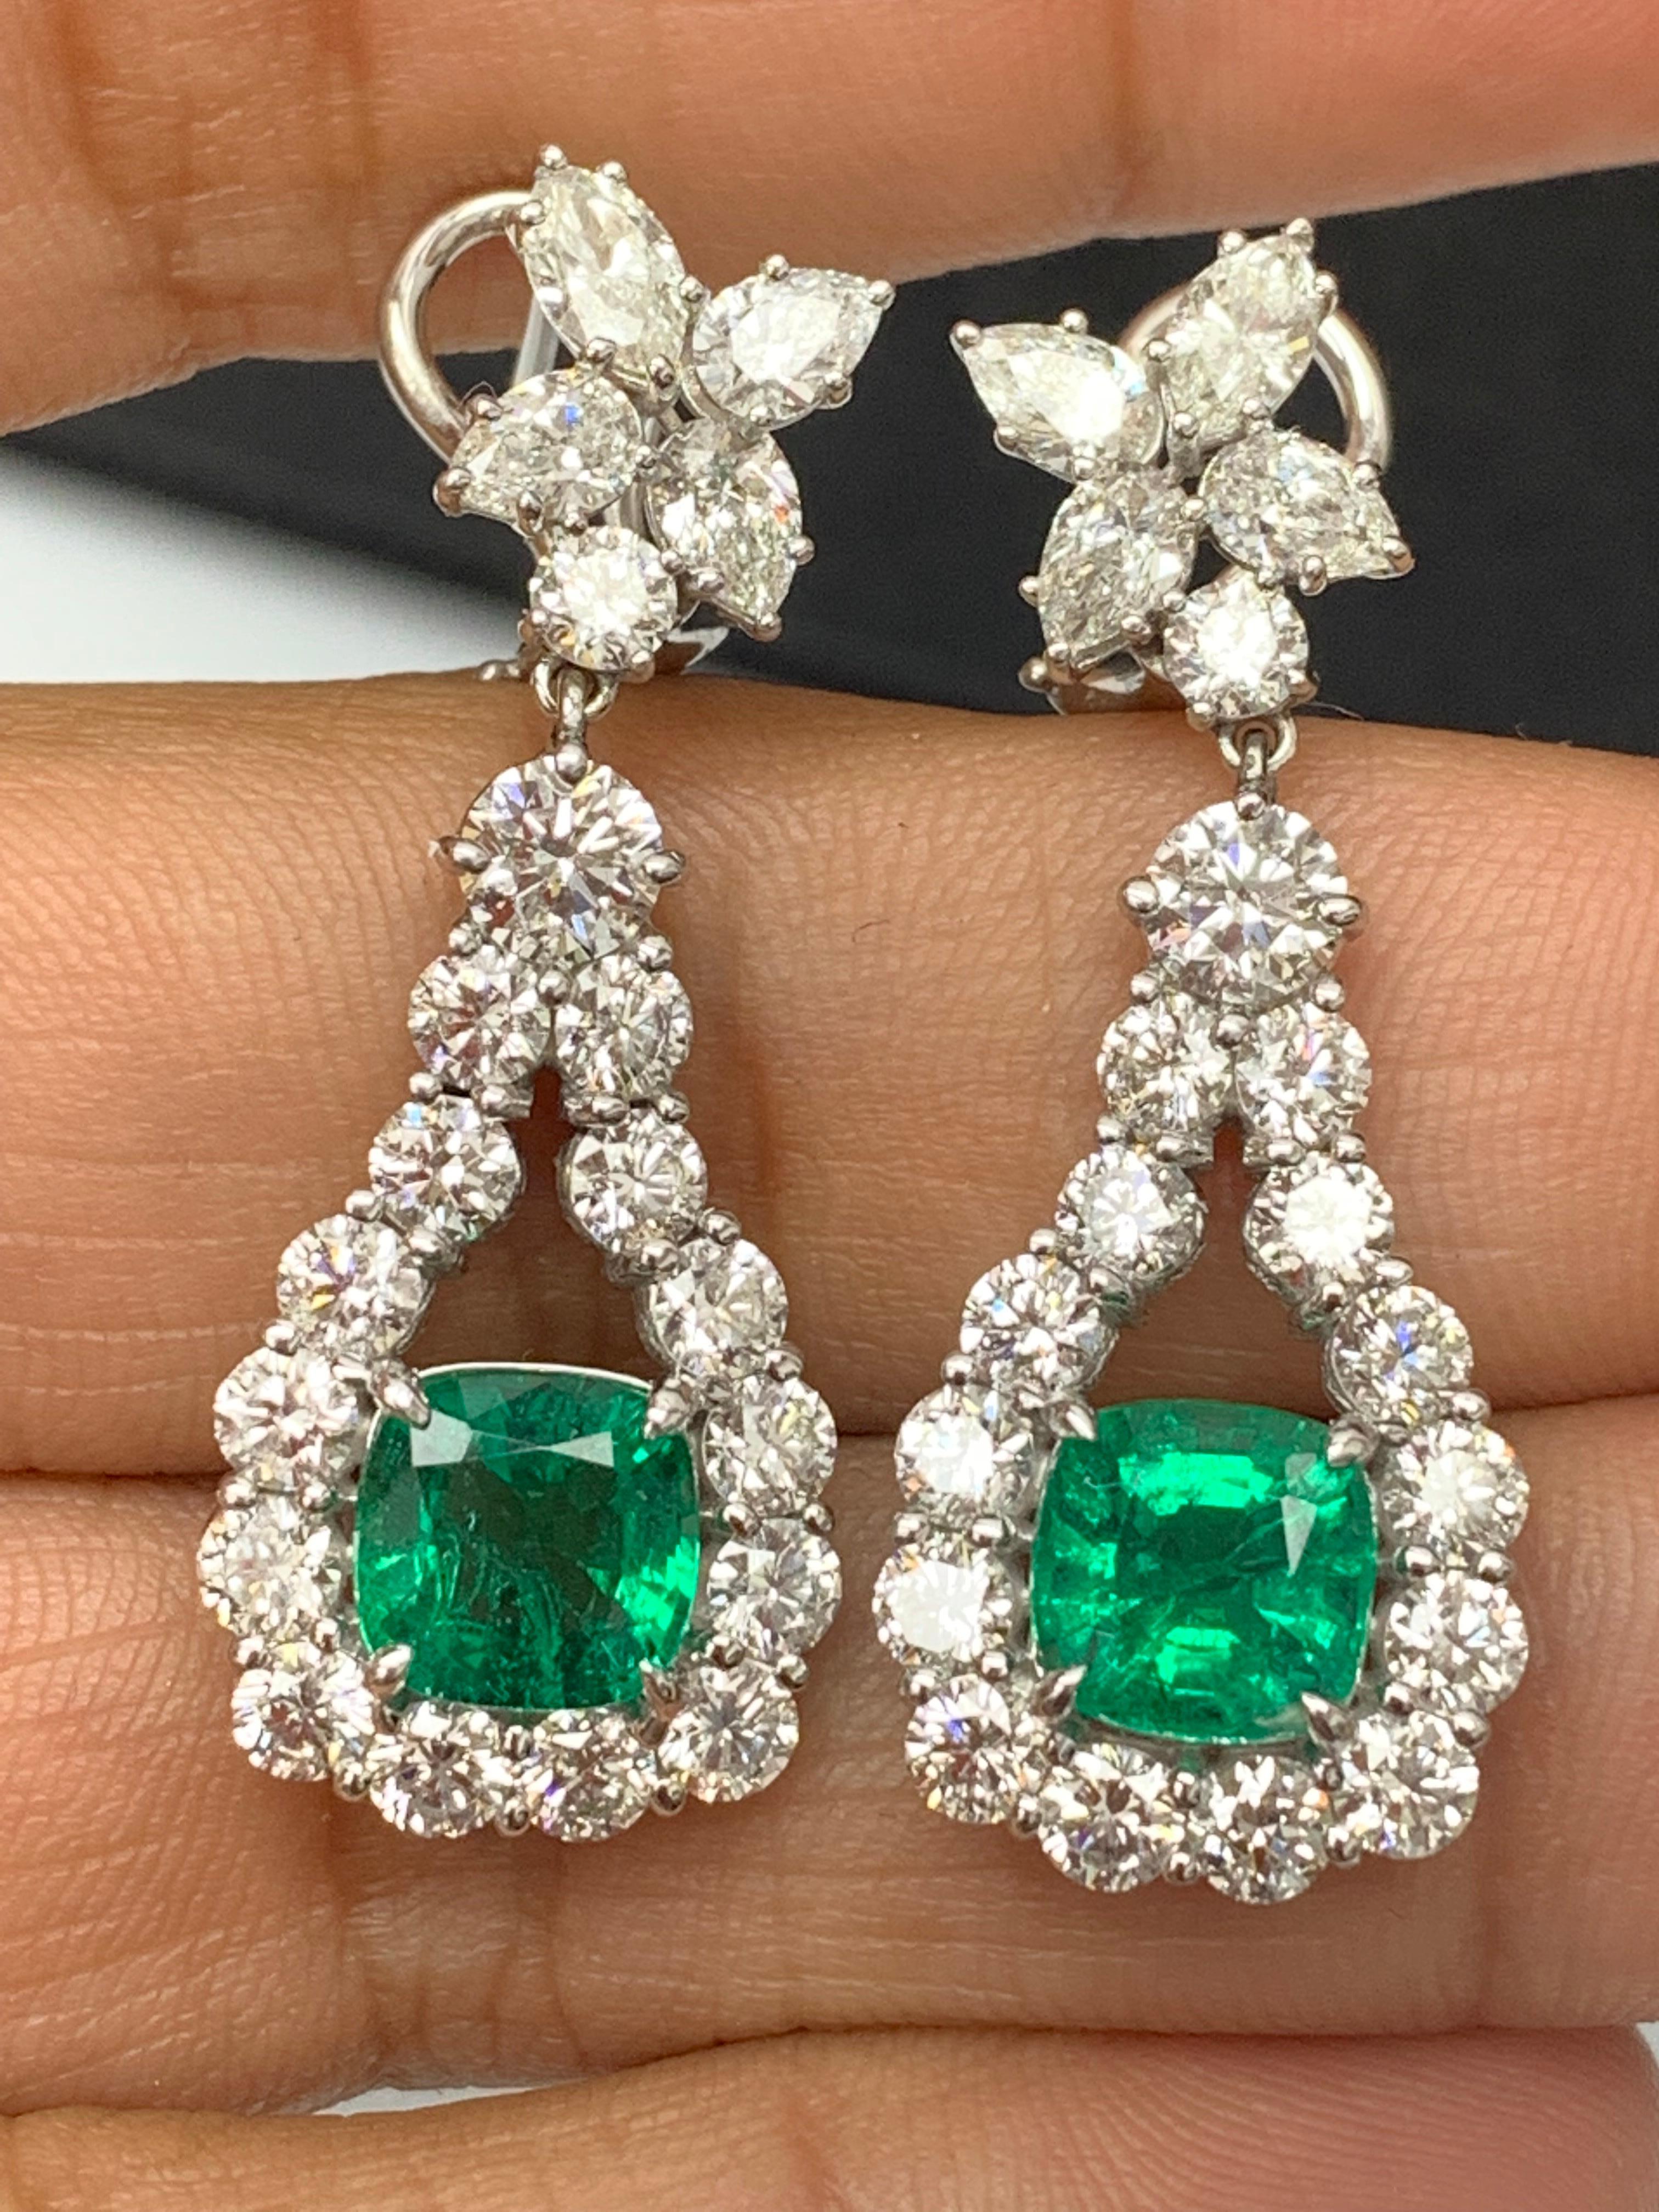 Contemporary 3.49 Carat Cushion Cut Emerald and Diamond Drop Earrings in 18K White Gold For Sale